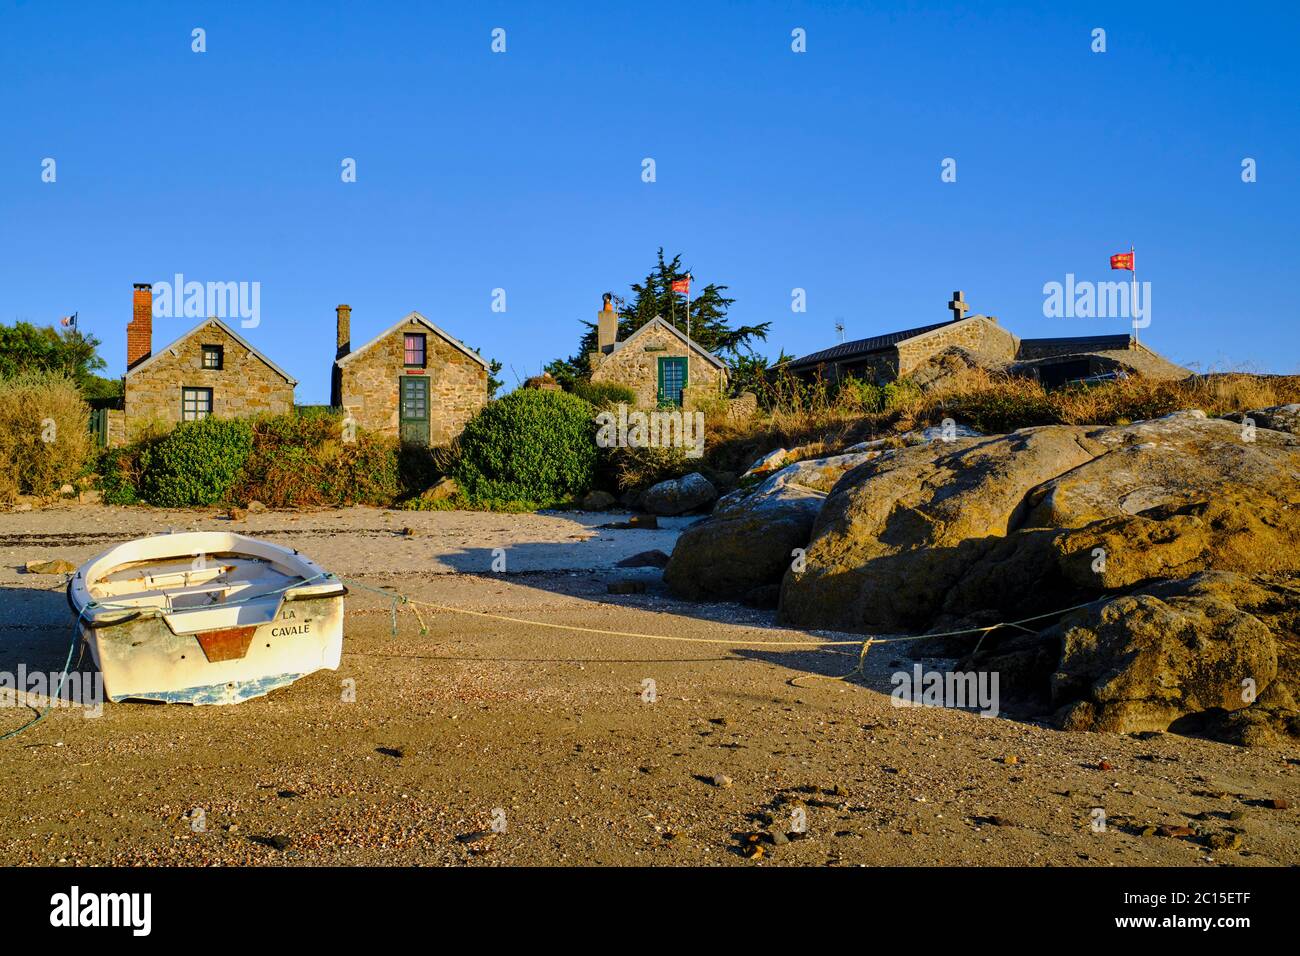 France, Normandy, Manche department, Chausey isands, Blainvillais village Stock Photo